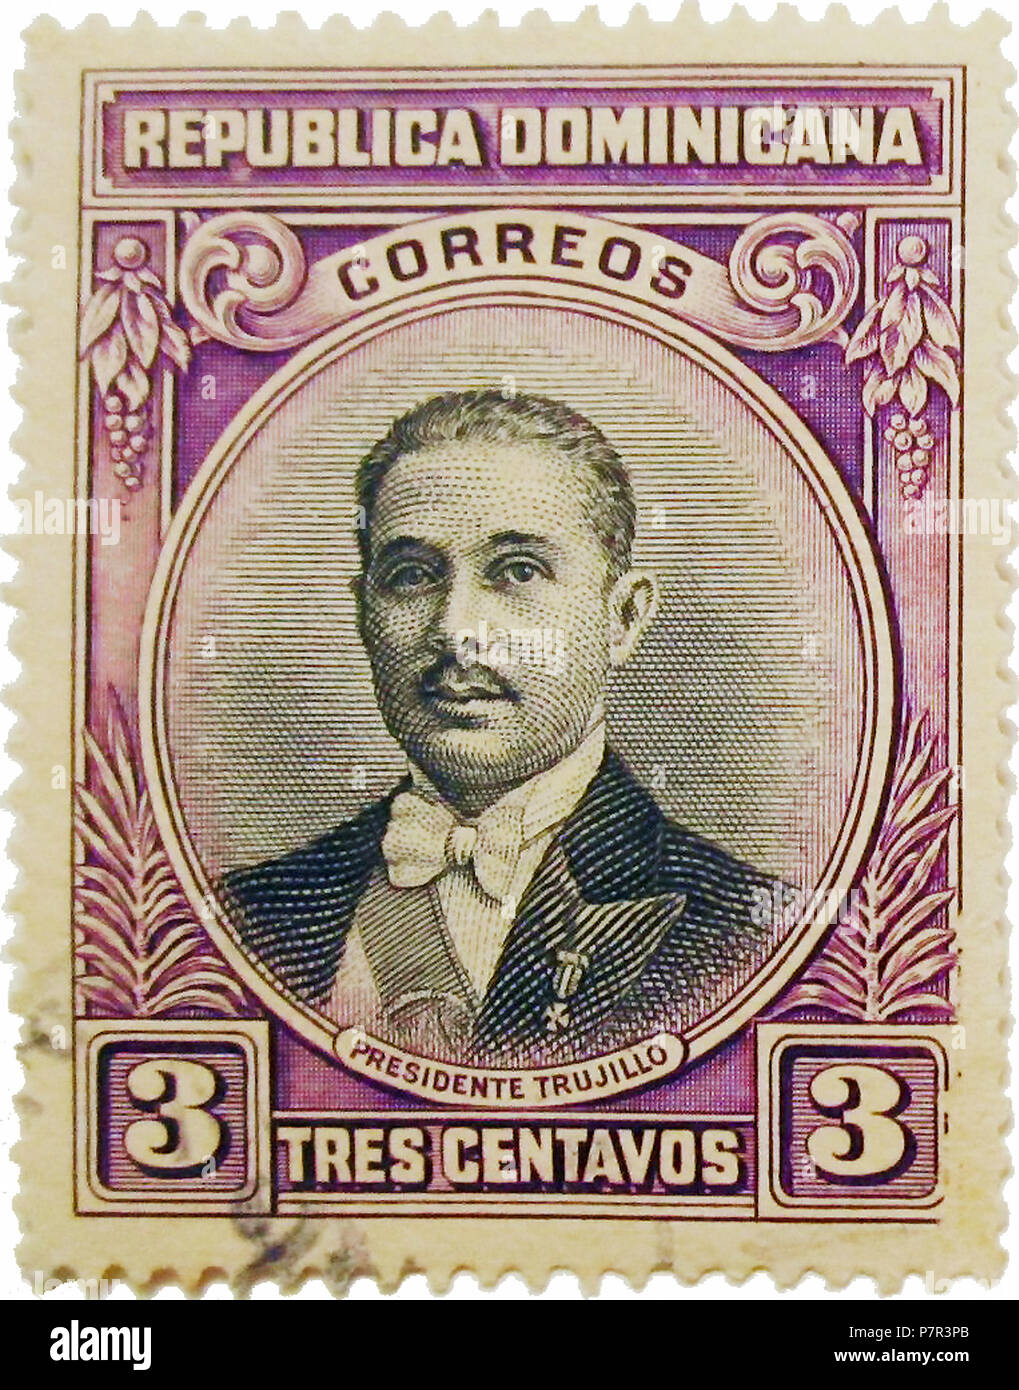 English: Dominican Republic stamp issued in 1933 on the occasion of President Rafael Trujillo's 42nd birthday. Another stamp showed Trujillo in military uniform. 10 September 2014, 22:48:25 325 Rafael Trujillo 1933 Stock Photo